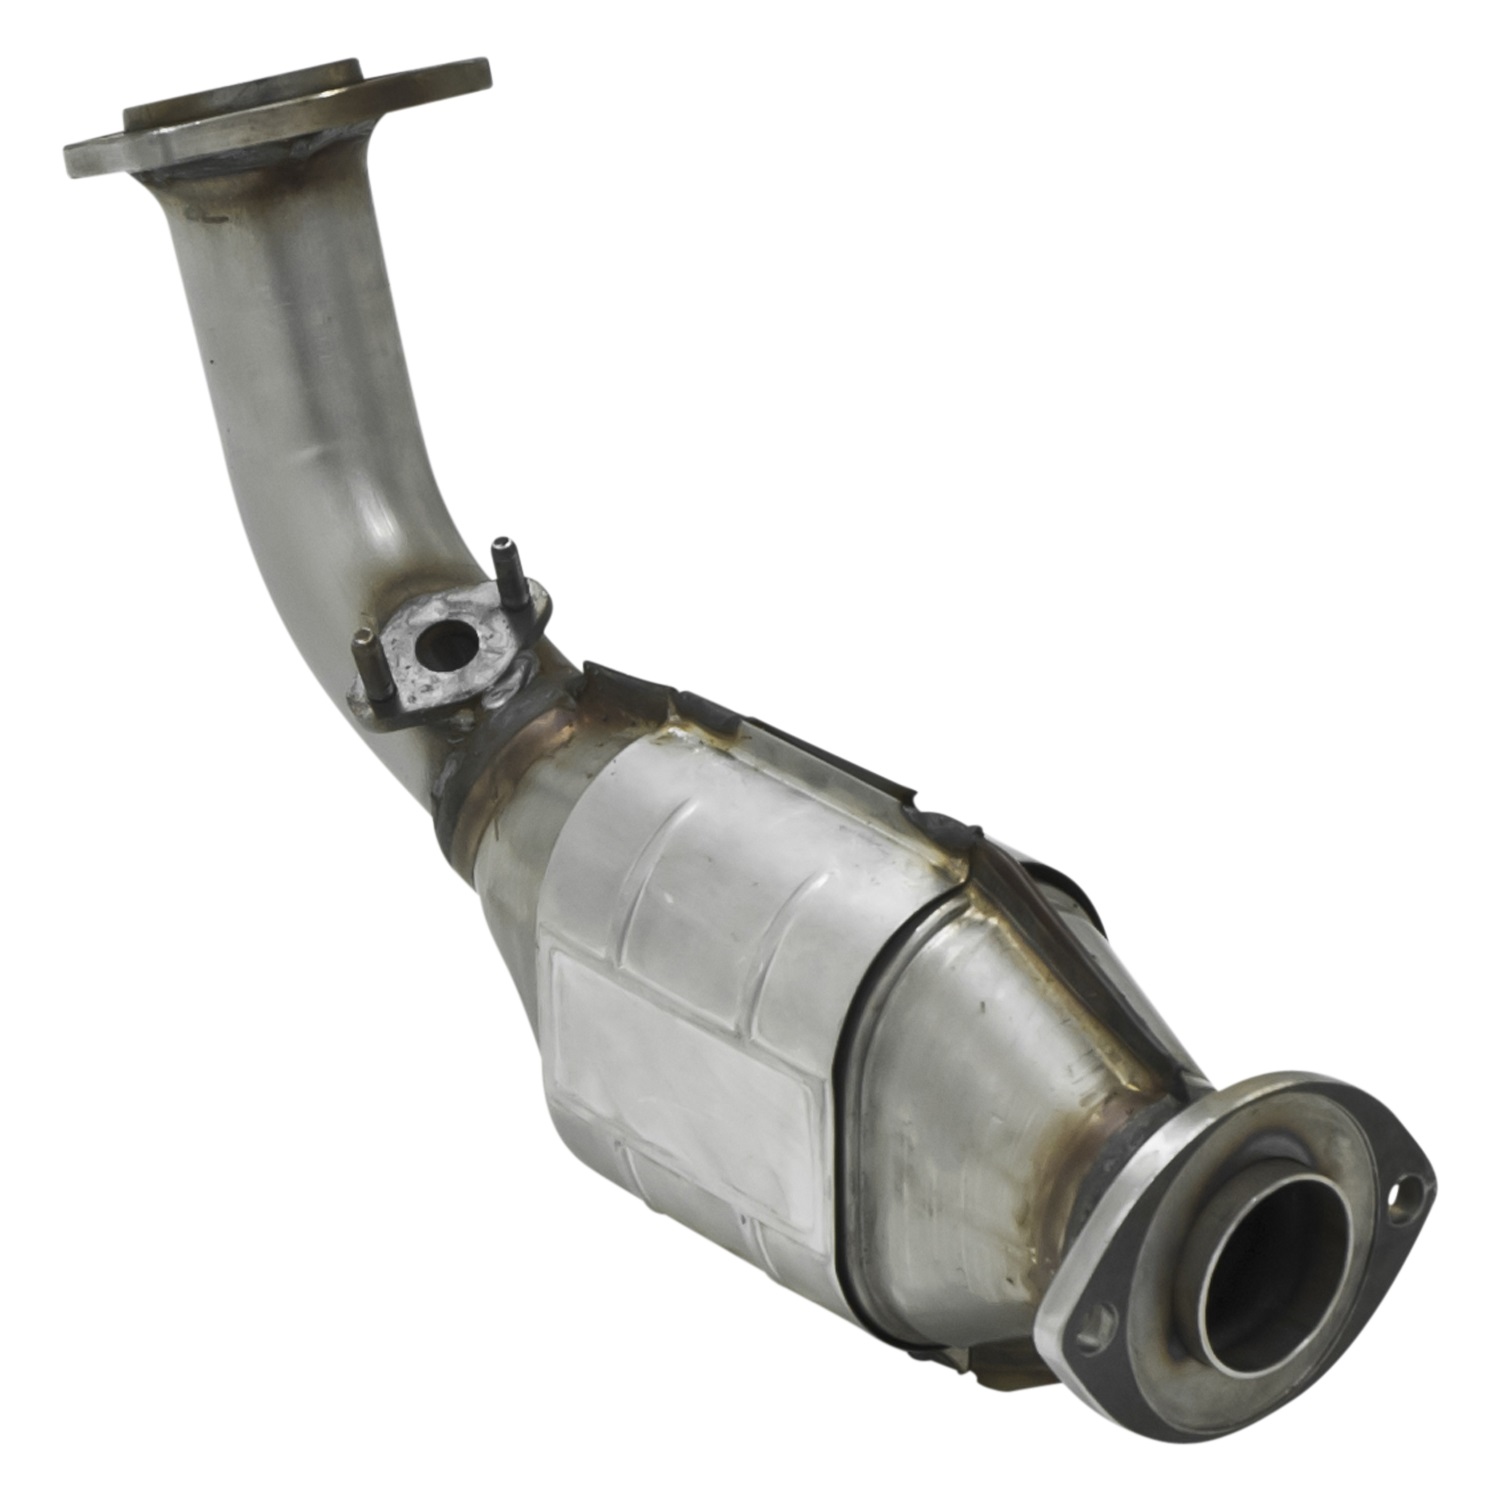 Flowmaster Flowmaster 2050004 Direct Fit Catalytic Converter Fits 00-04 Tacoma Tundra